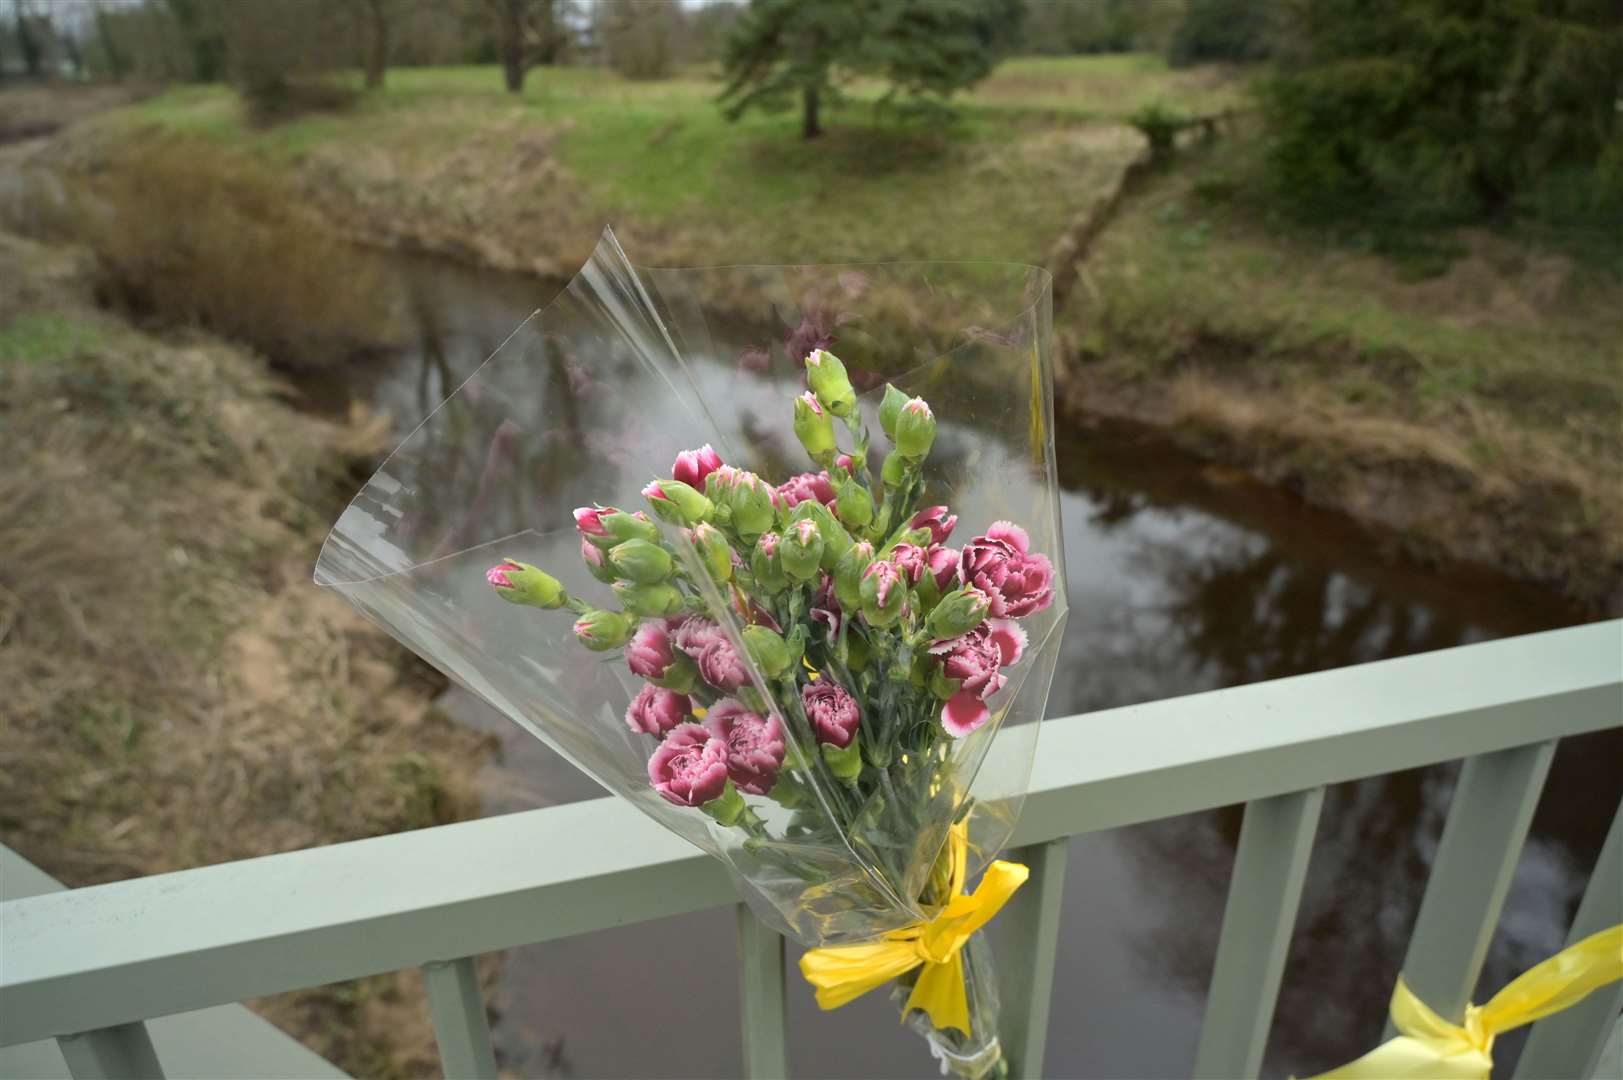 Tributes have been left on a bridge over the River Wyre to Nicola Bulley (Dave Nelson/PA)